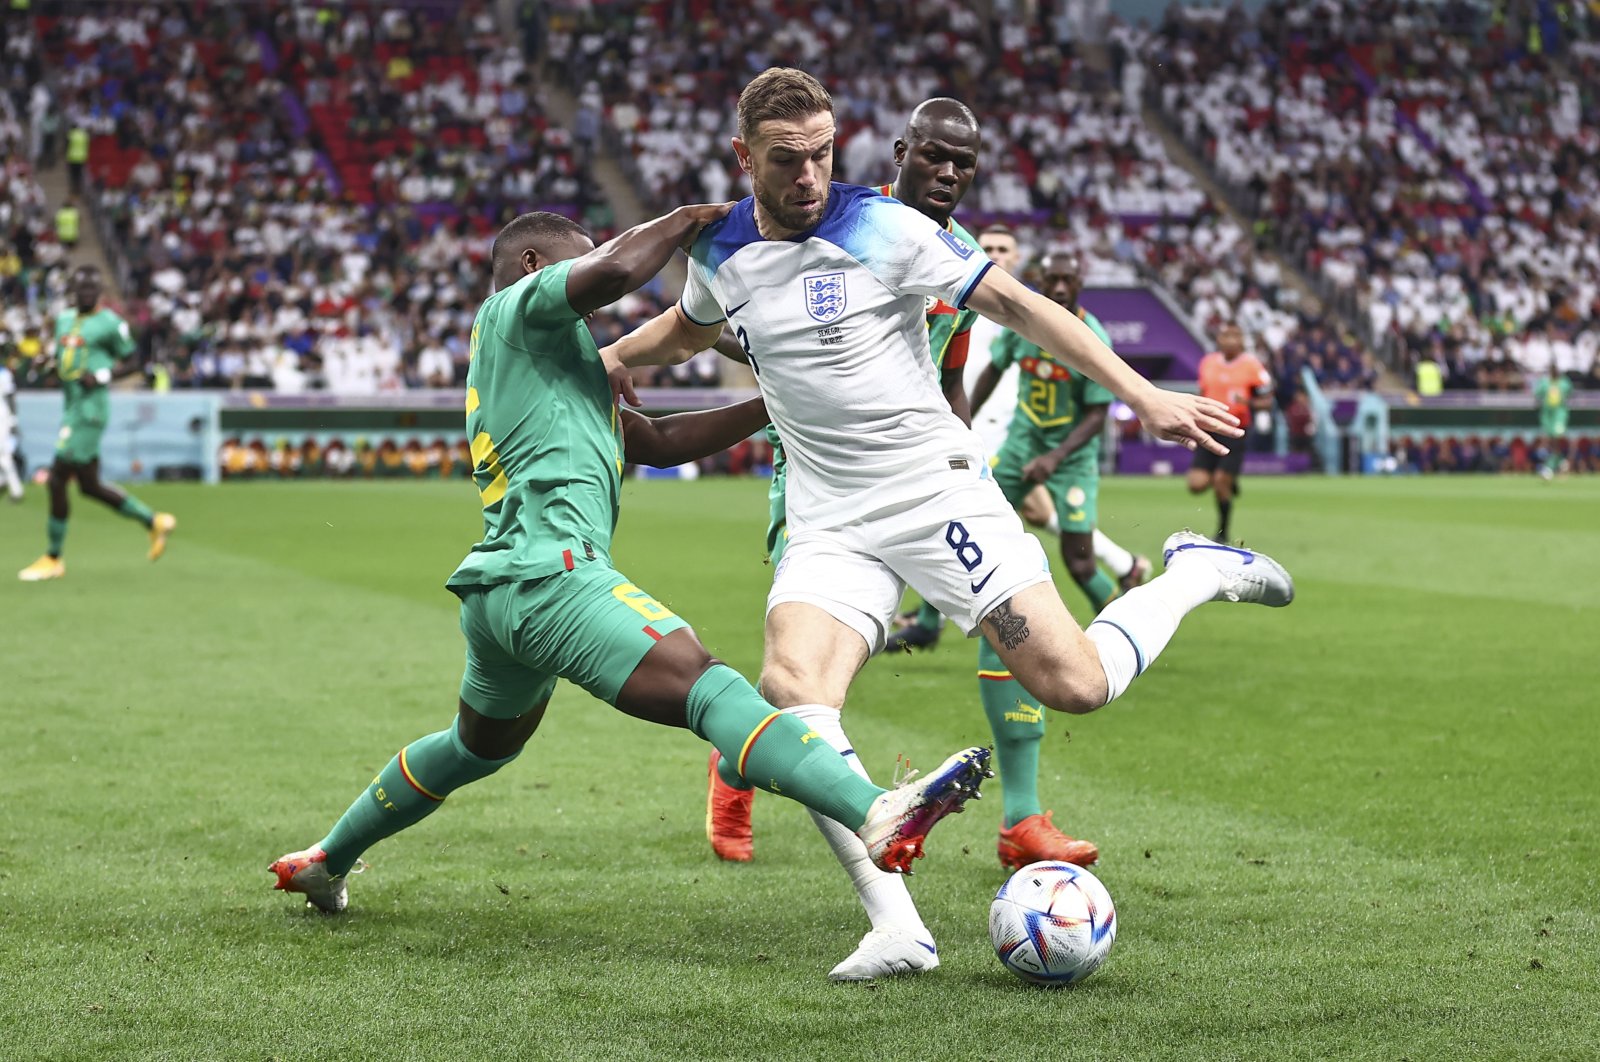 England&#039;s Jordan Henderson in action with Senegal&#039;s Nampalys Mendy during the World Cup round of 16 match at Al Bayt Stadium, Doha, Qatar, Dec. 4, 2022. (AA Photo)